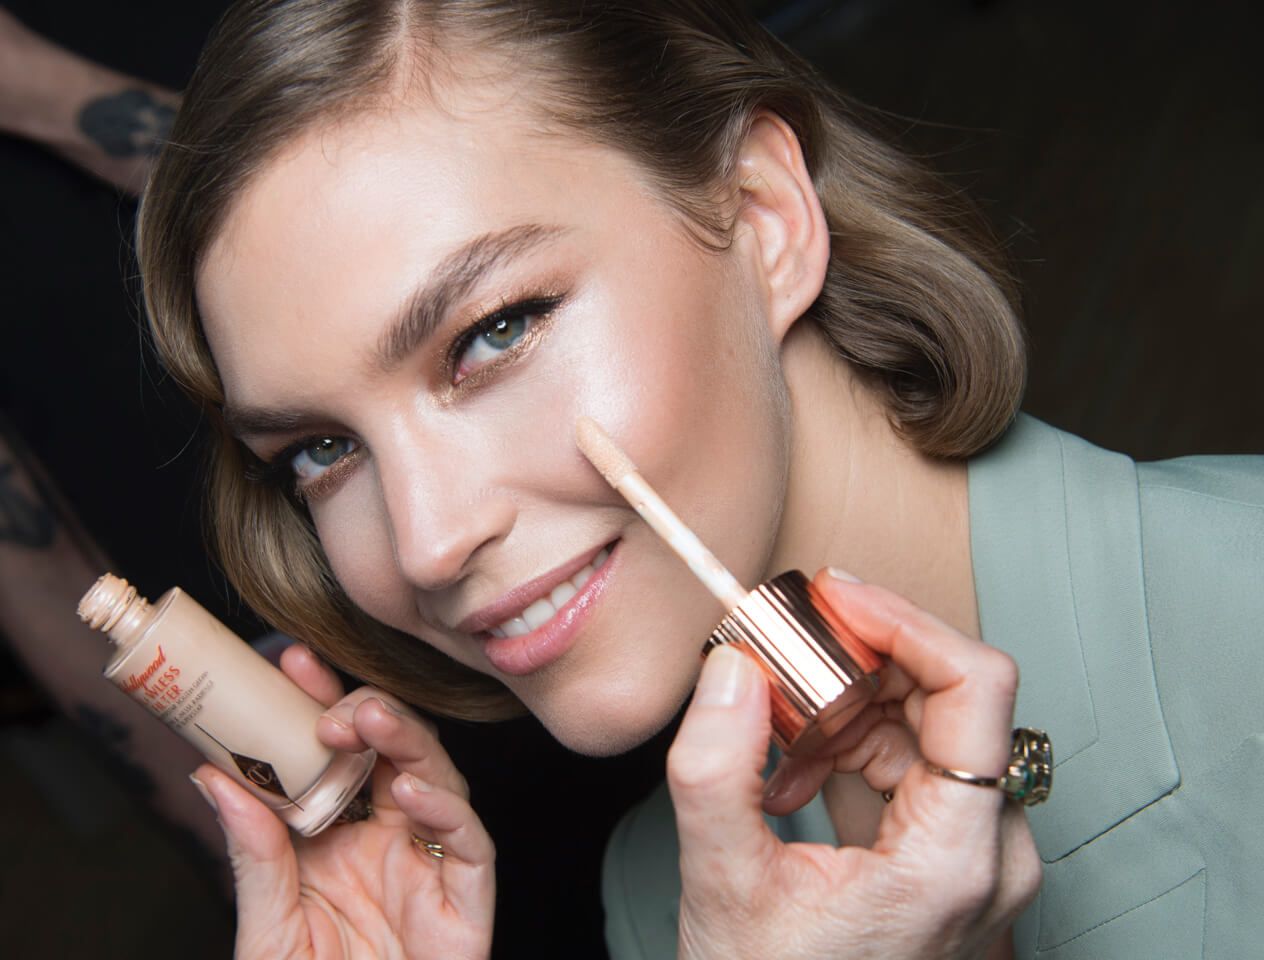 Arizona Muse backstage at Charlotte Tilbury for Alice Temperley LFW